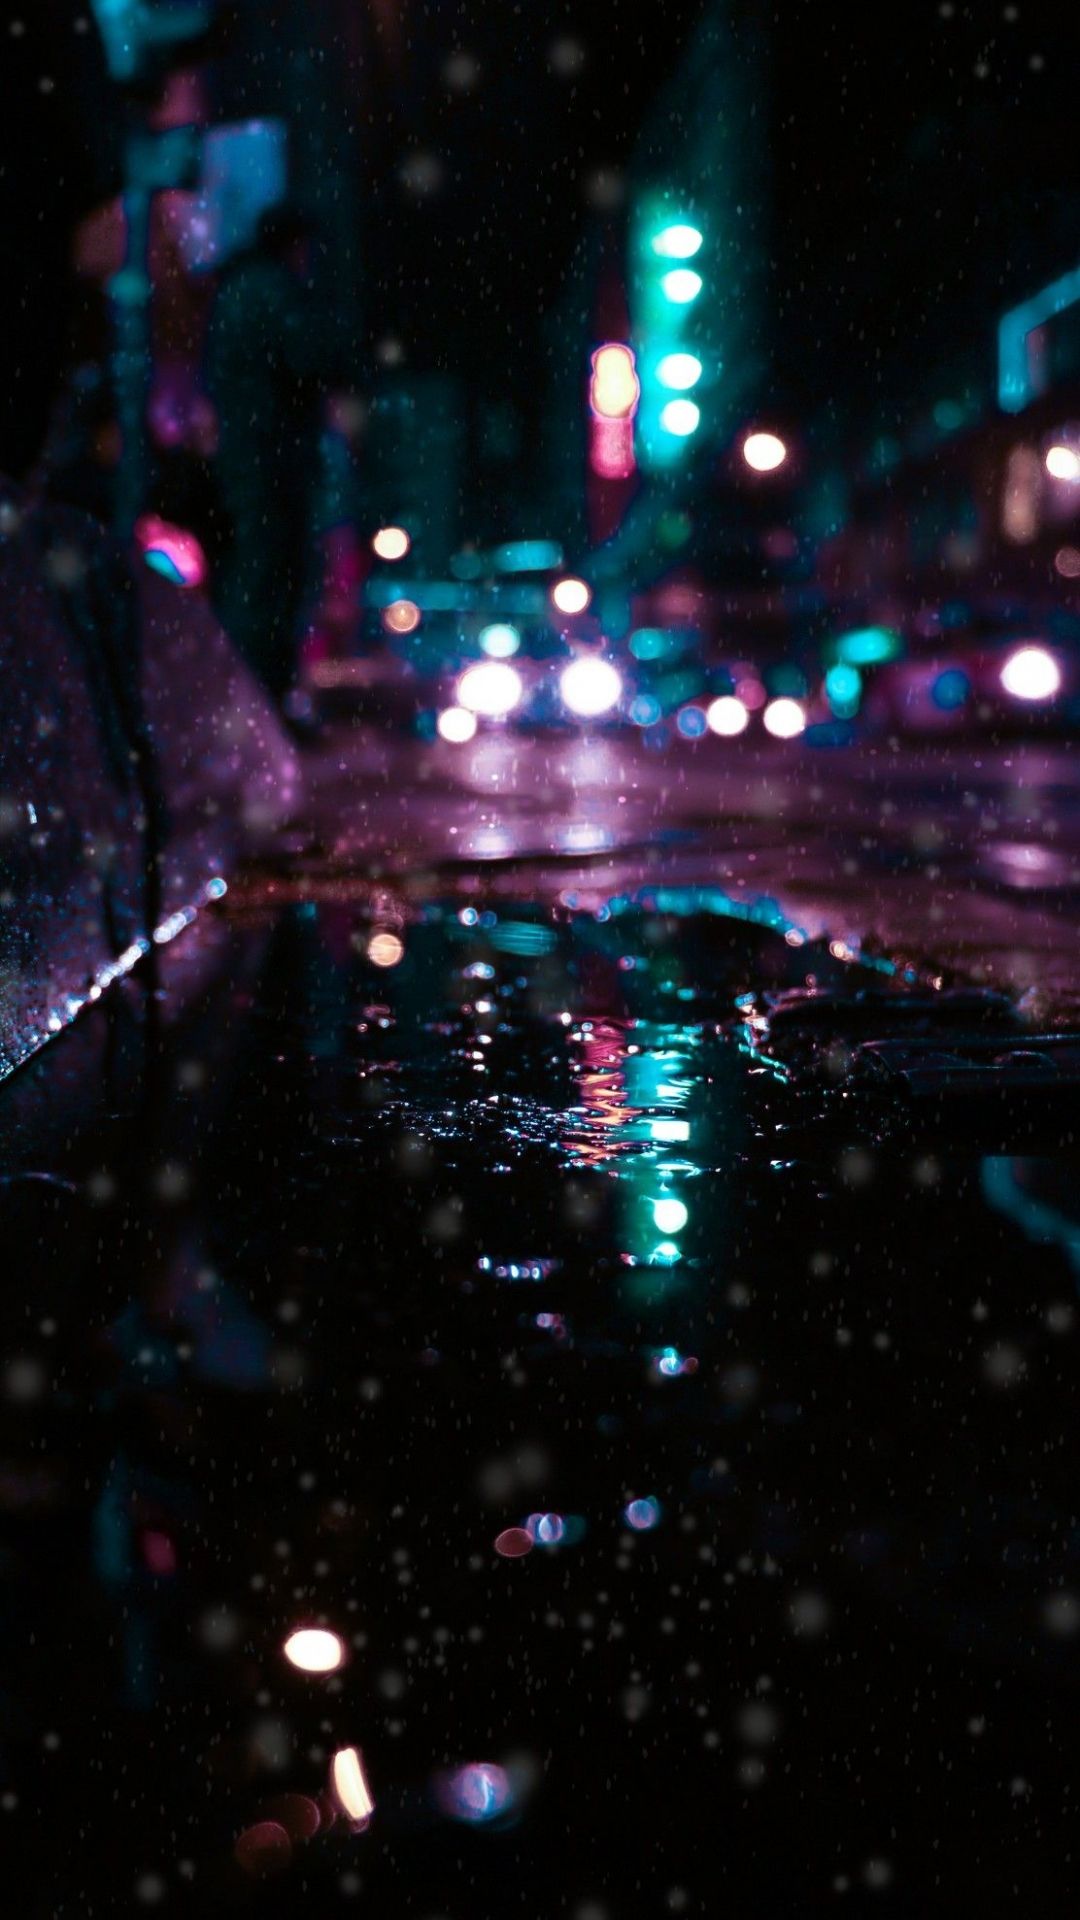 Free download 4k Wallpaper Follow me With image Rainy wallpaper Neon [1112x2196] for your Desktop, Mobile & Tablet. Explore Night Aesthetic 4k Wallpaper. Night Aesthetic 4k Wallpaper, Aesthetic 4K